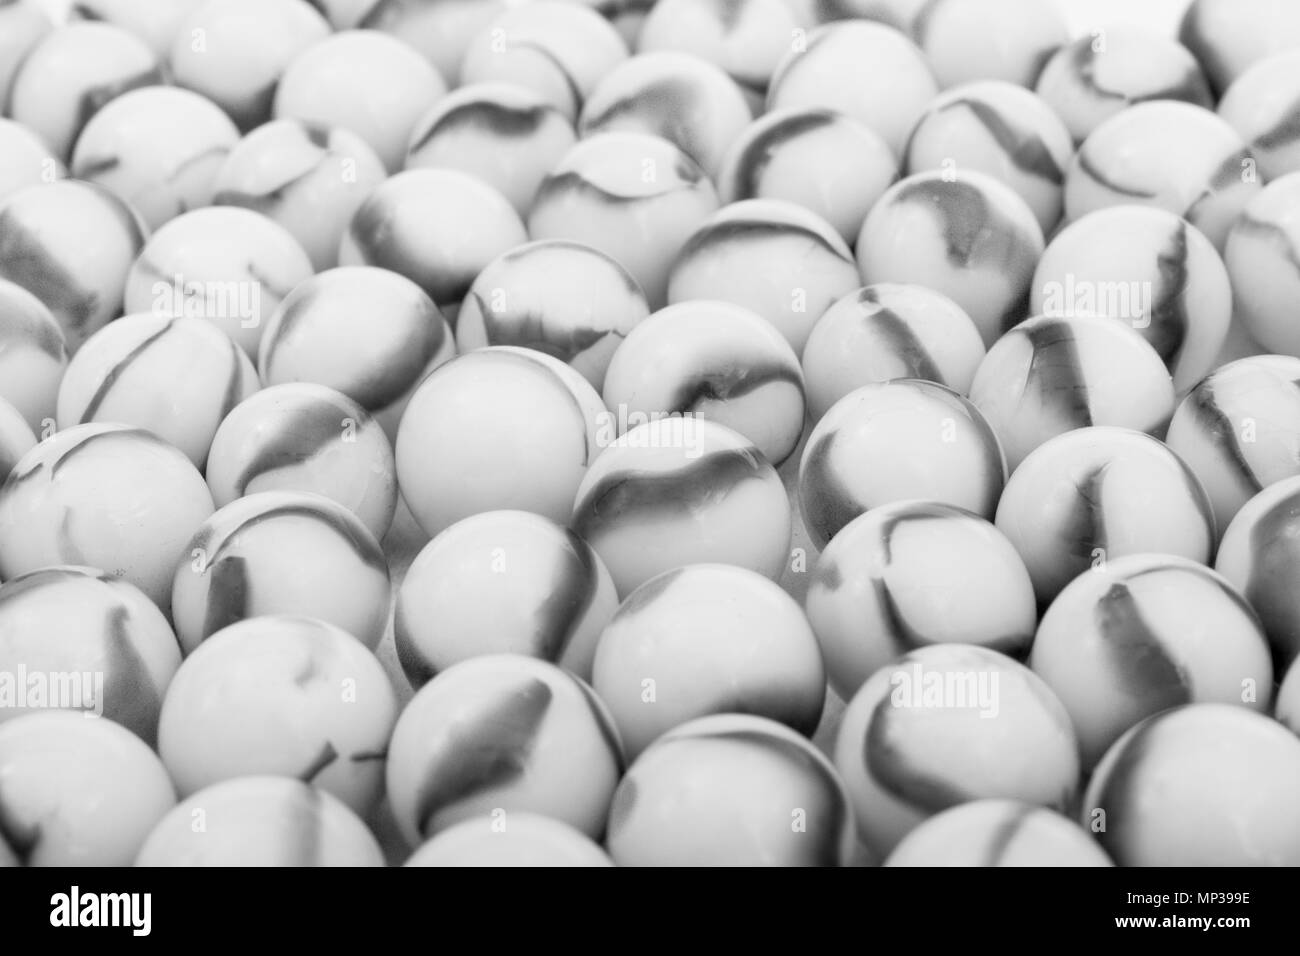 Allegory Black and White Stock Photos & Images - Alamy